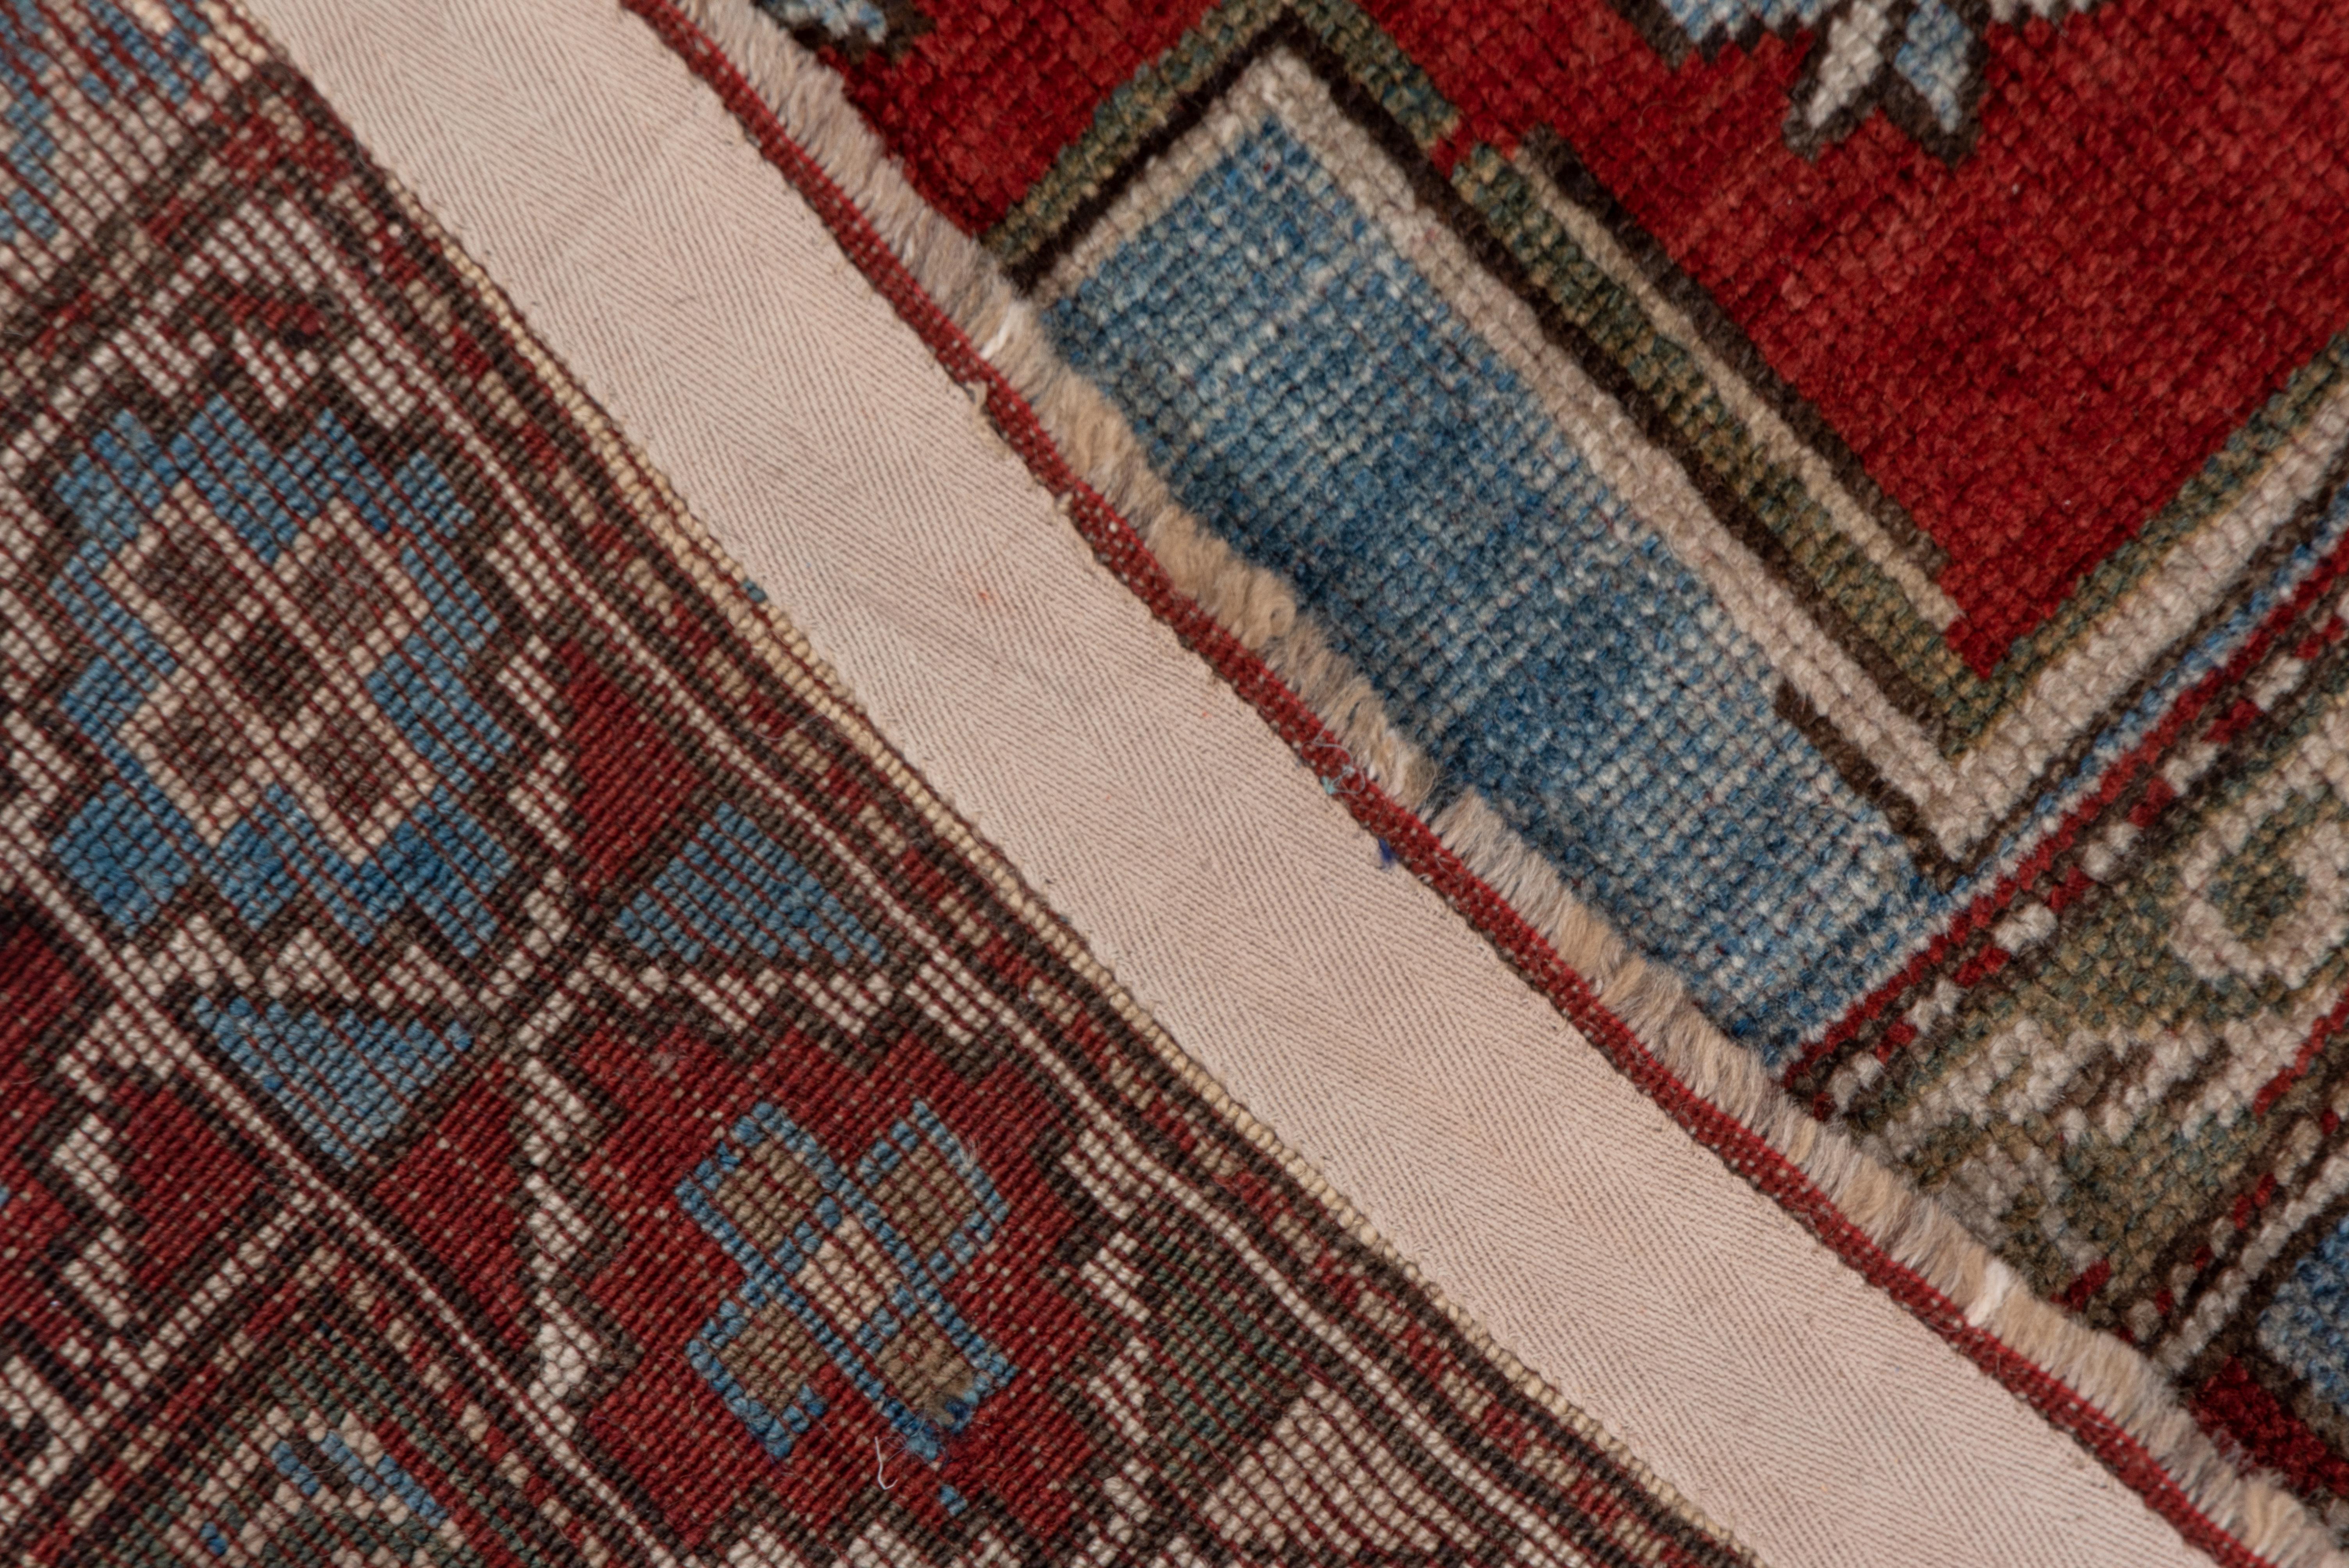 Hand-Knotted Antique Tribal Caucasian Rug, Blue and Red Field, Green Accents, Kazak Style